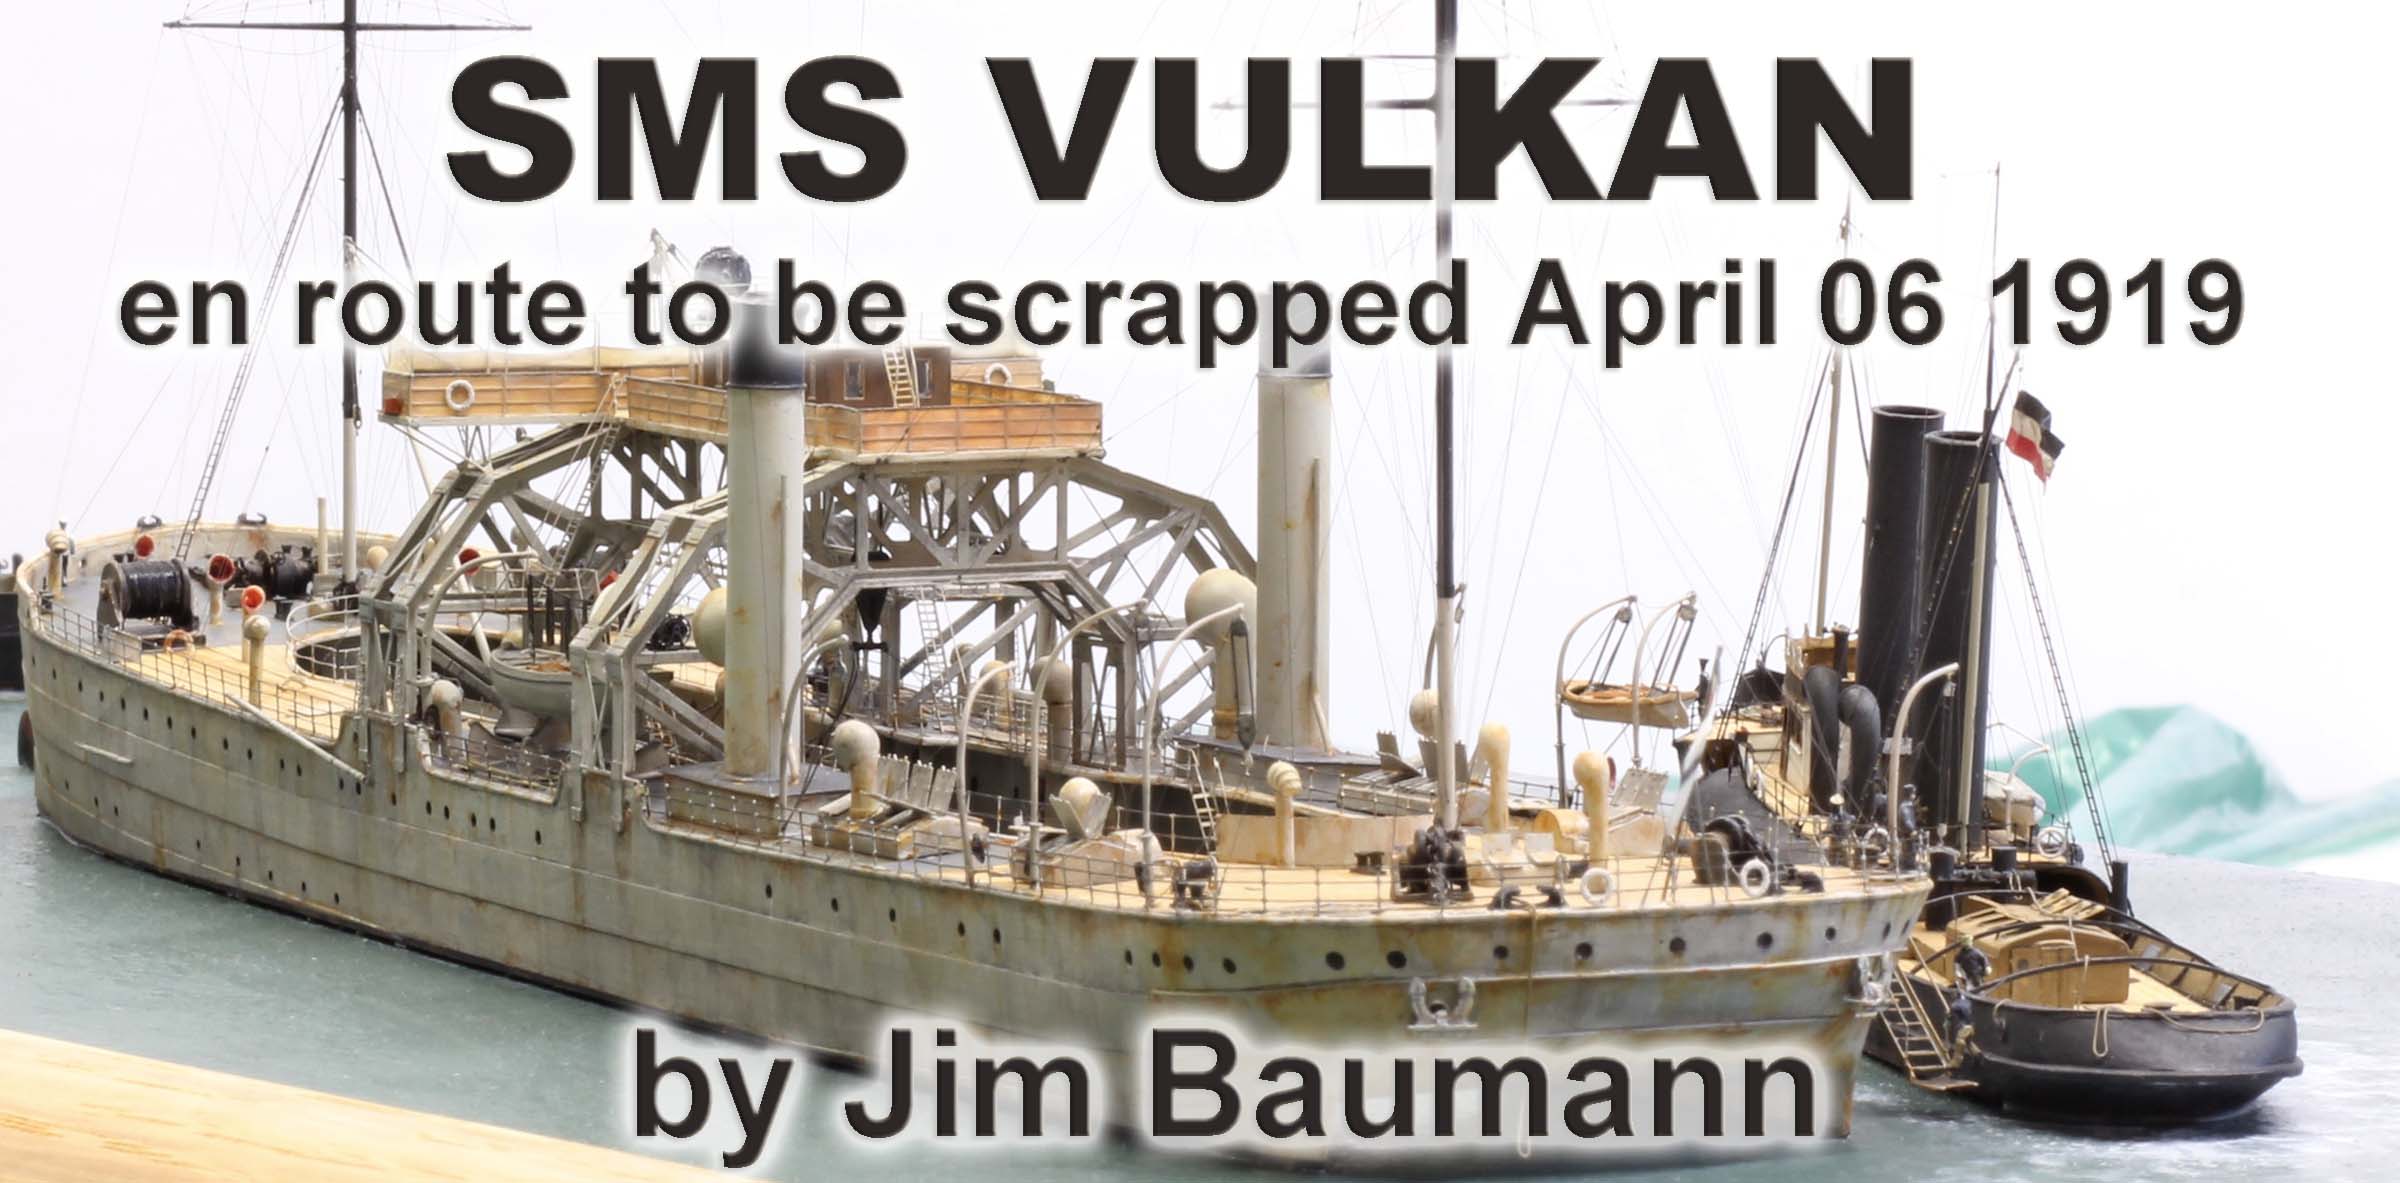 SMS VULKAN on route to be scrapped April 06 1919 by Jim Baumann